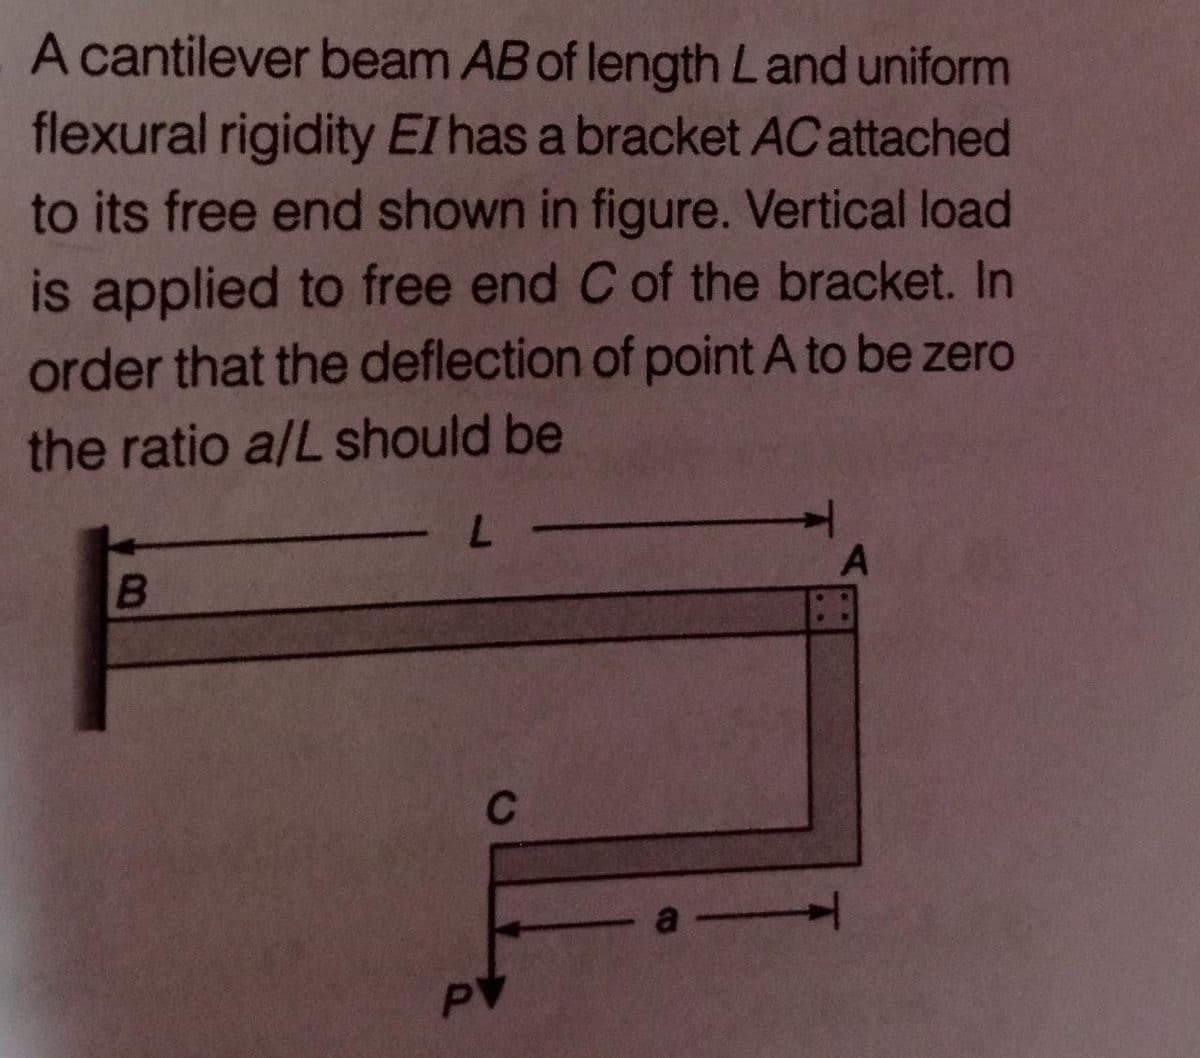 A cantilever beam AB of length Land uniform
flexural rigidity El has a bracket AC attached
to its free end shown in figure. Vertical load
is applied to free end C of the bracket. In
order that the deflection of point A to be zero
the ratio a/L should be
7-
C
PV
